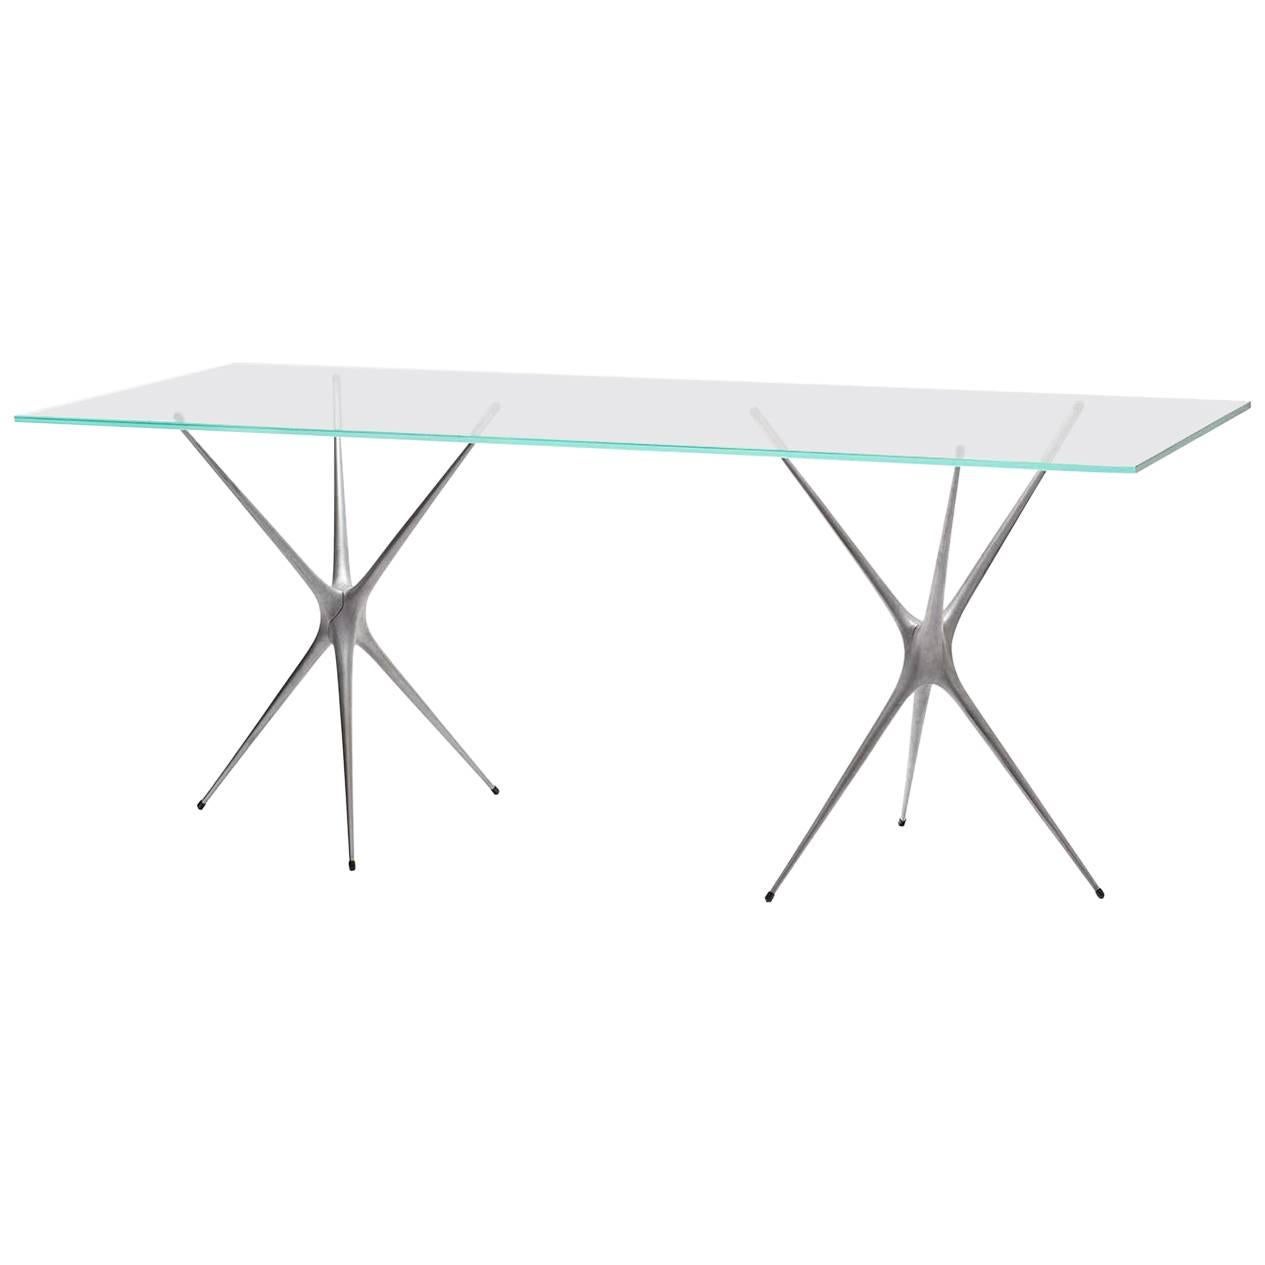 Minimalist Supernova, Recycled Cast Aluminum Trestle Table Legs & Glass by Made in Ratio